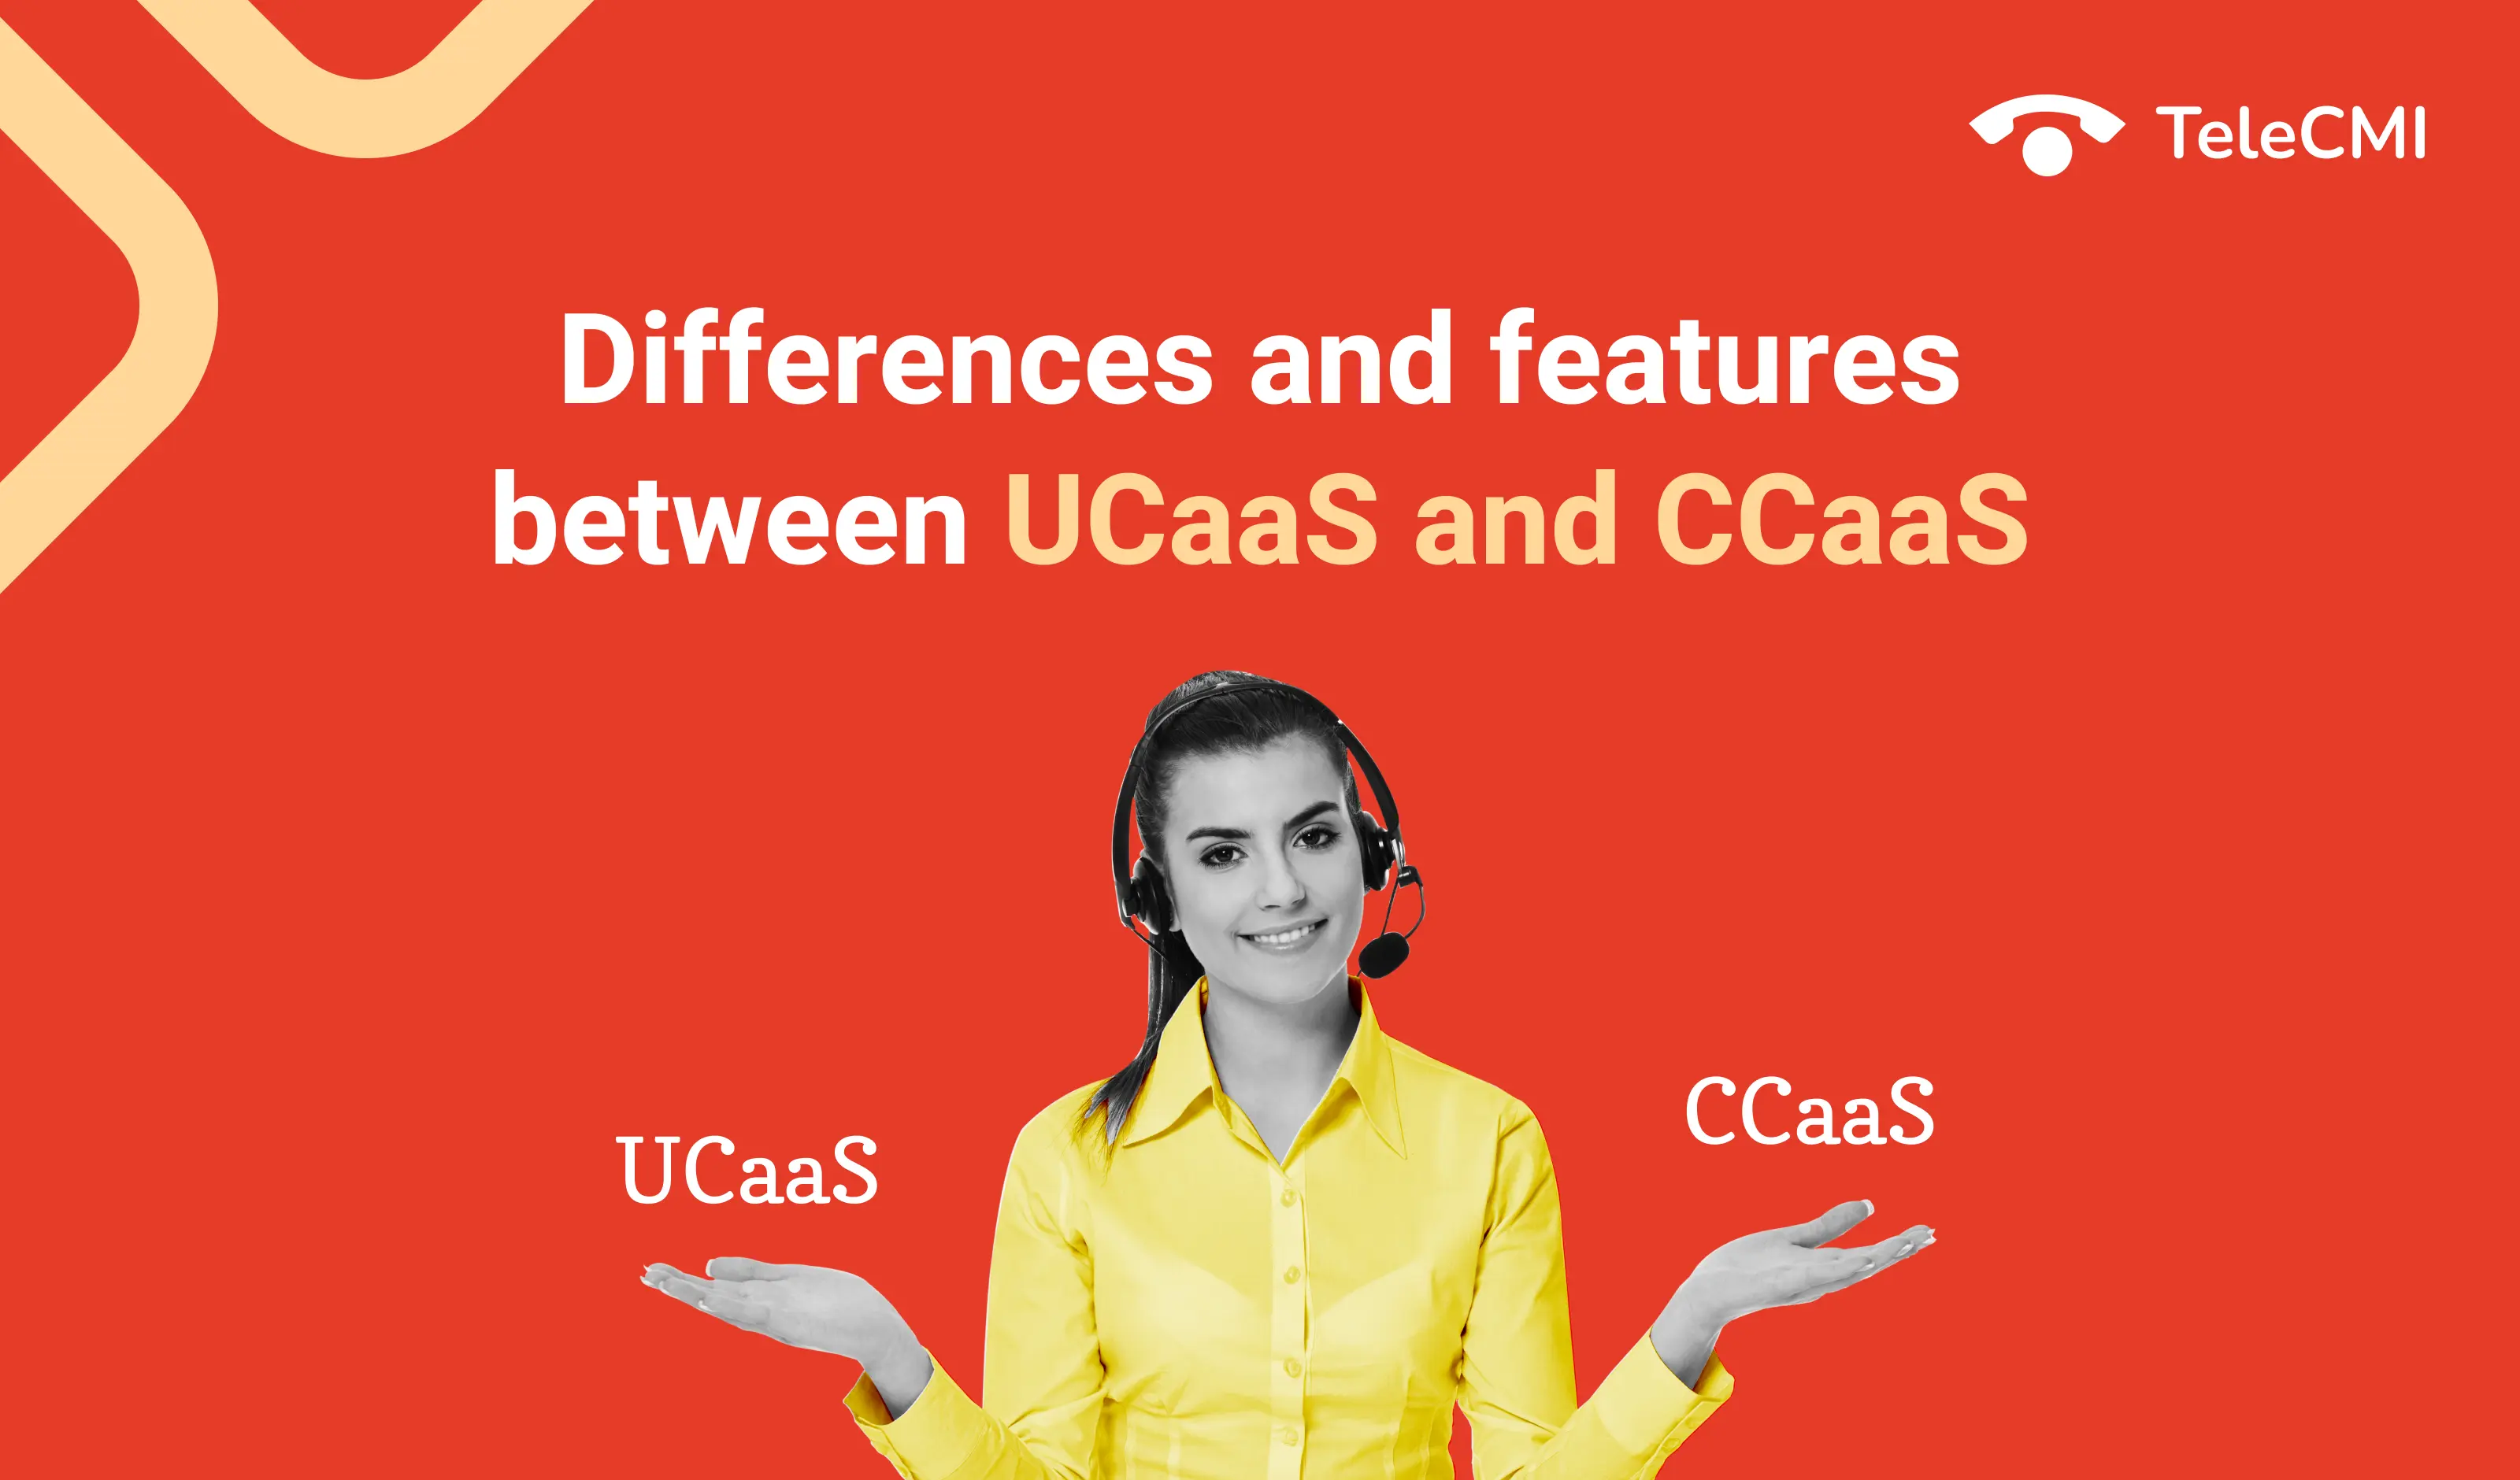 UCaaS vs CCaaS: What are the Differences and Features